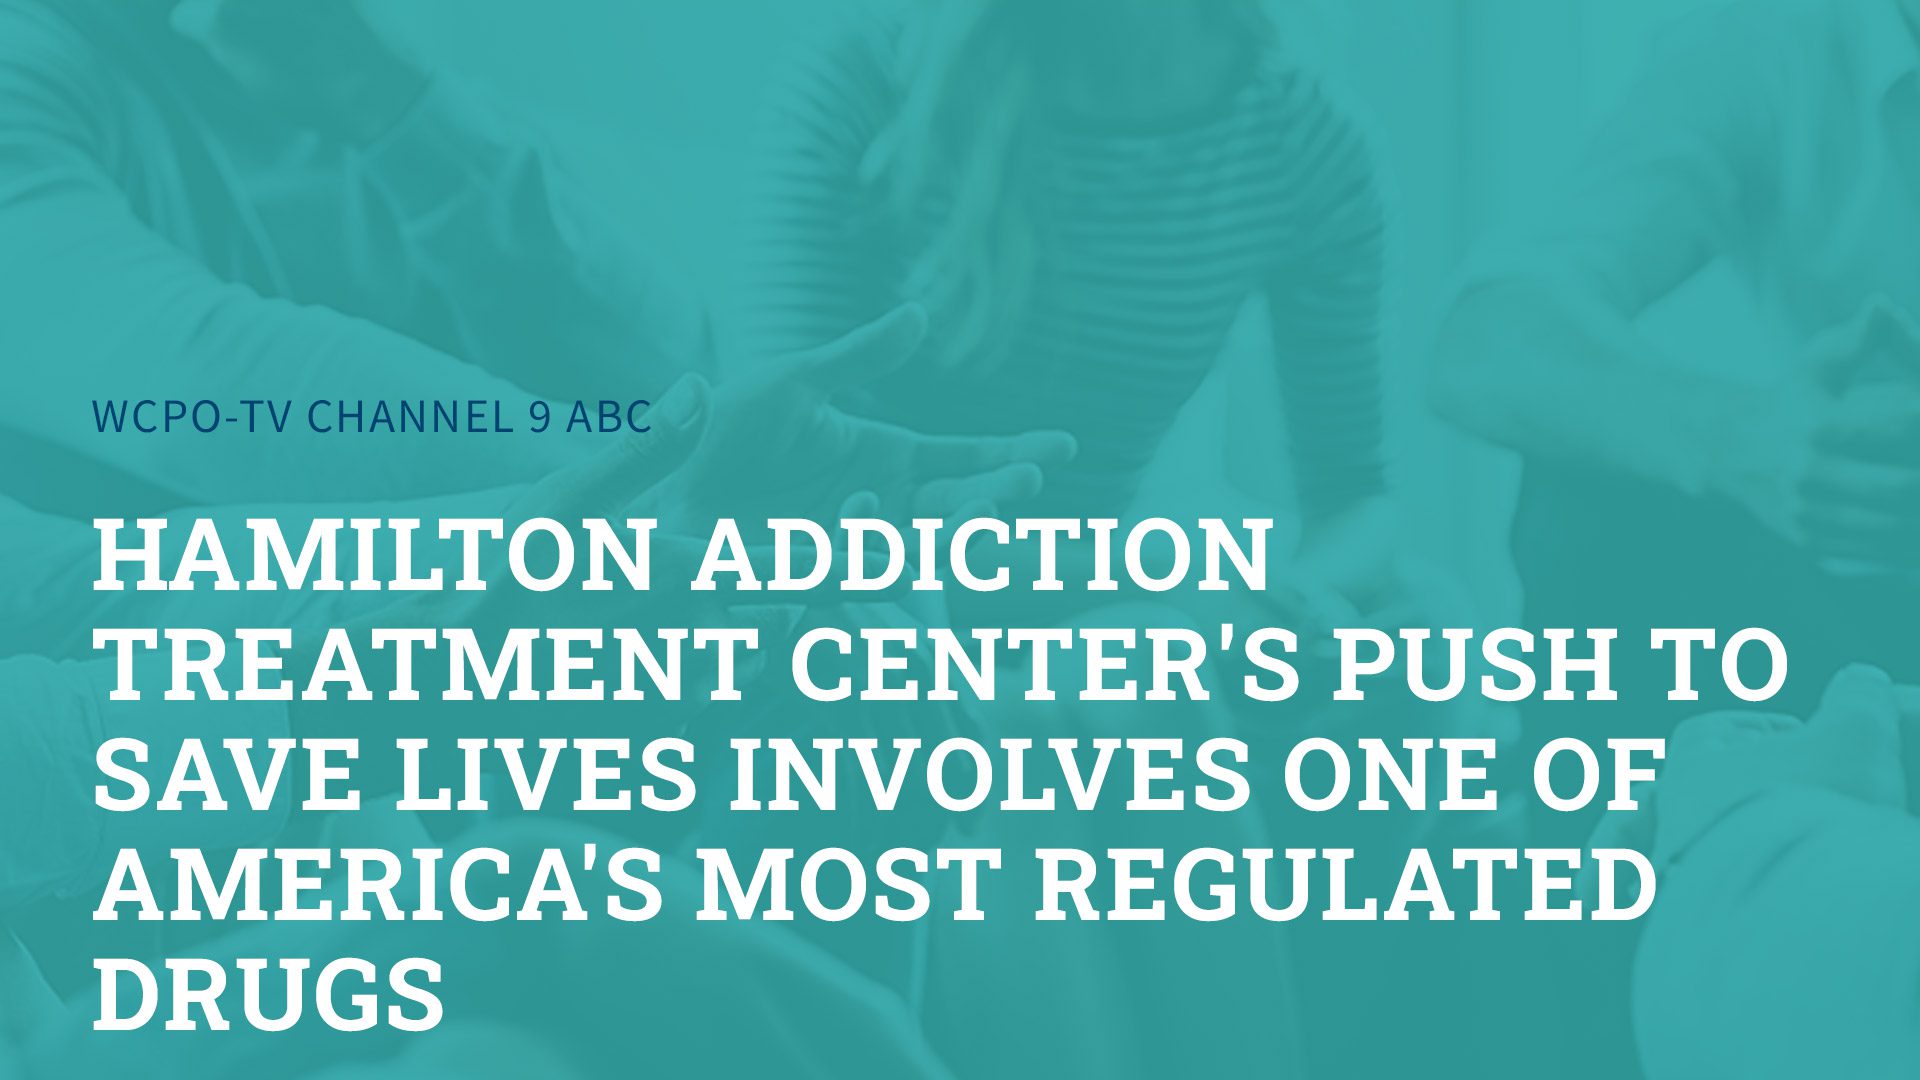 Hamilton Addiction Treatment Center’s Push to Save Lives Involves One of America’s Most Regulated Drugs